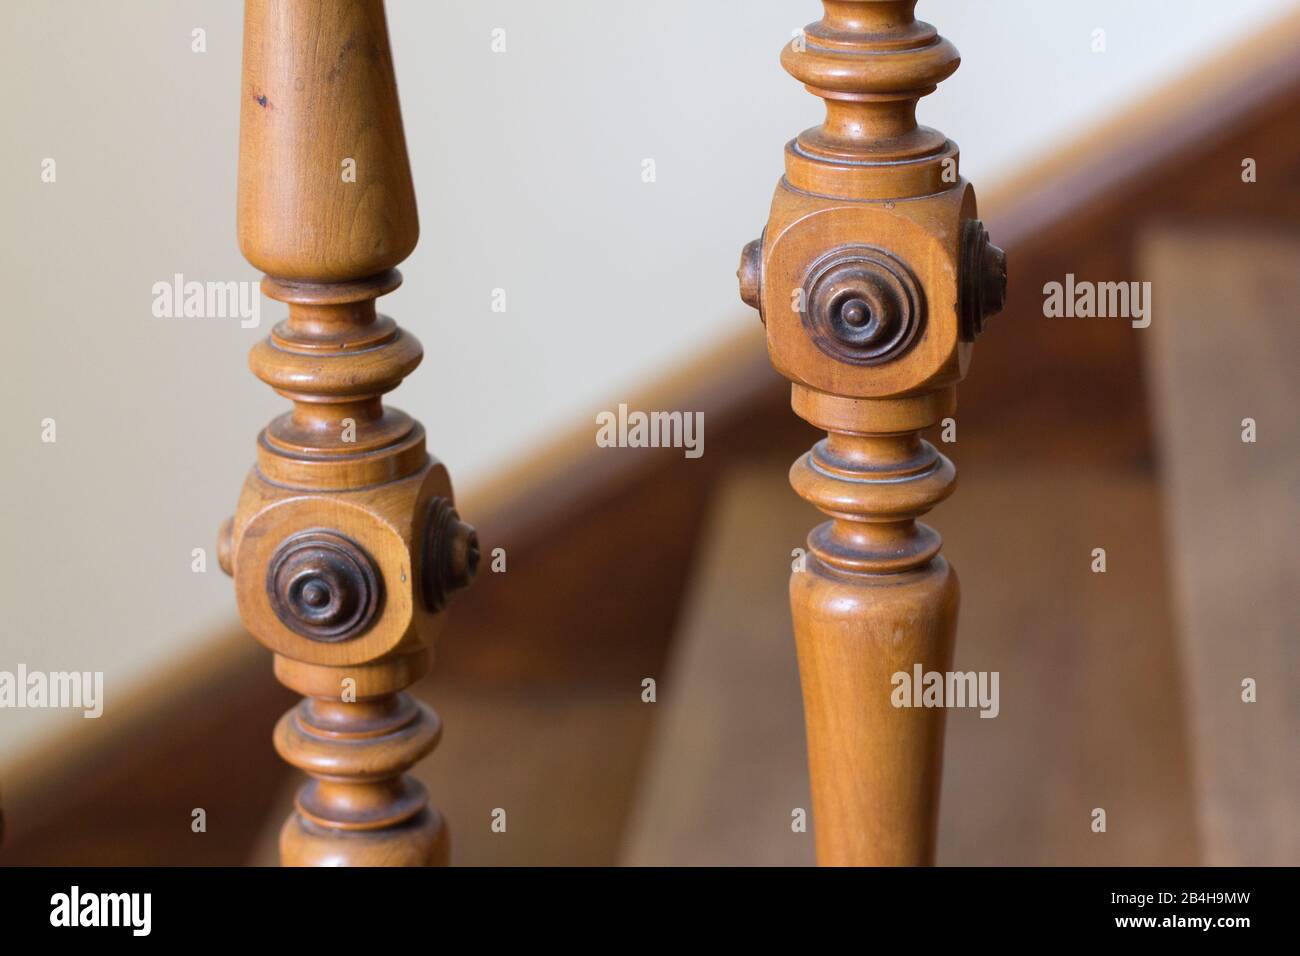 Decorated railing poles made of wood Stock Photo